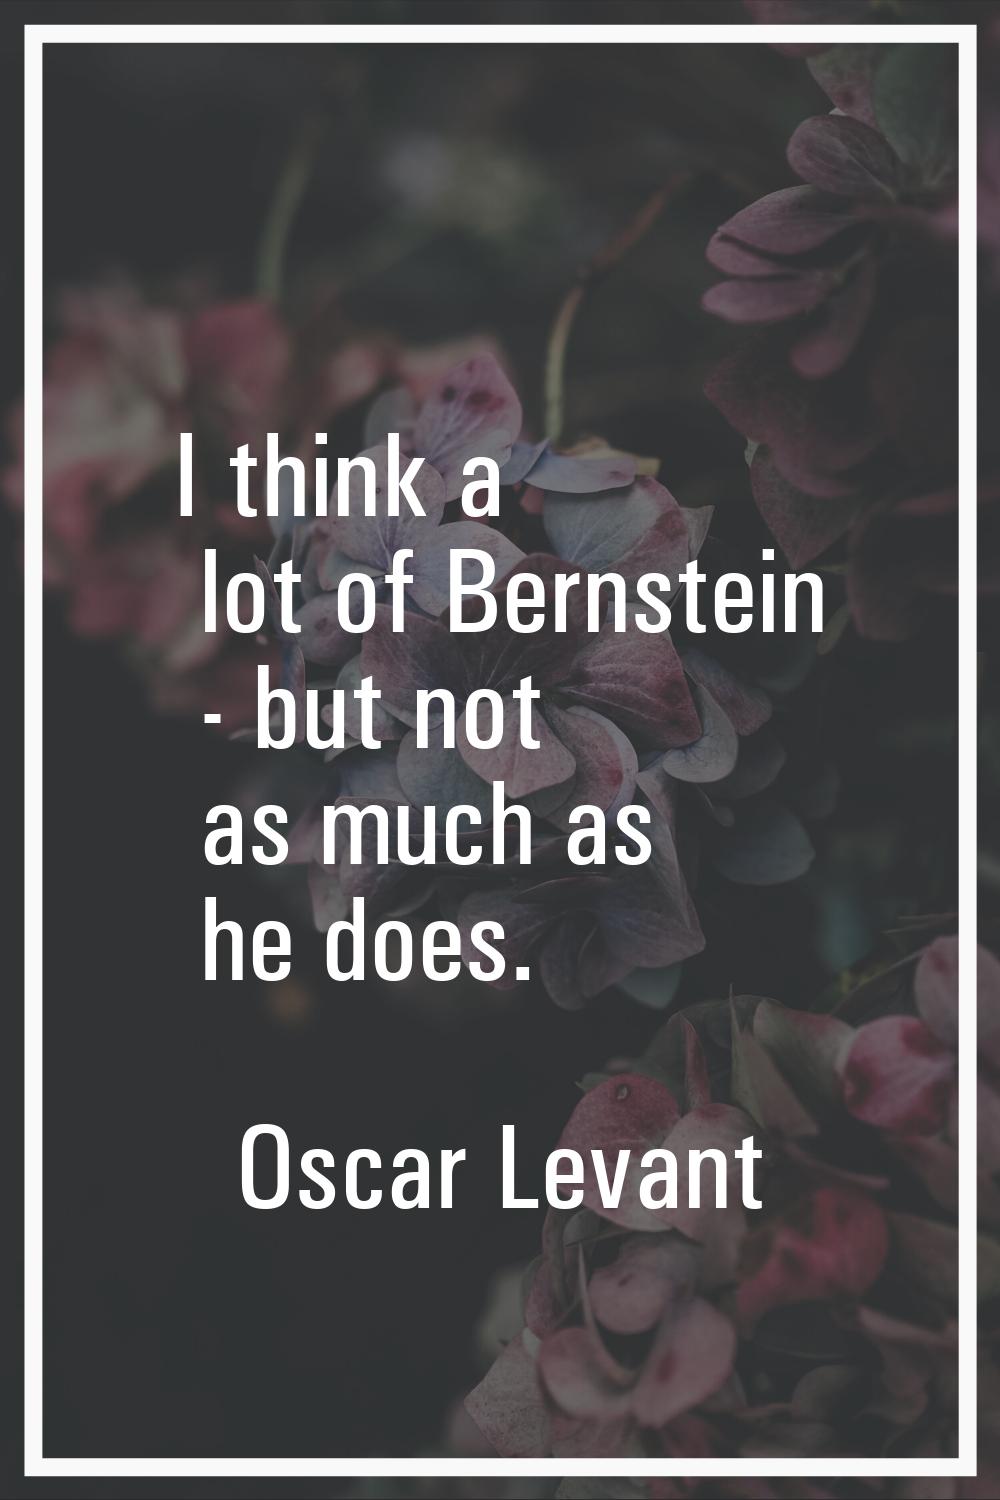 I think a lot of Bernstein - but not as much as he does.